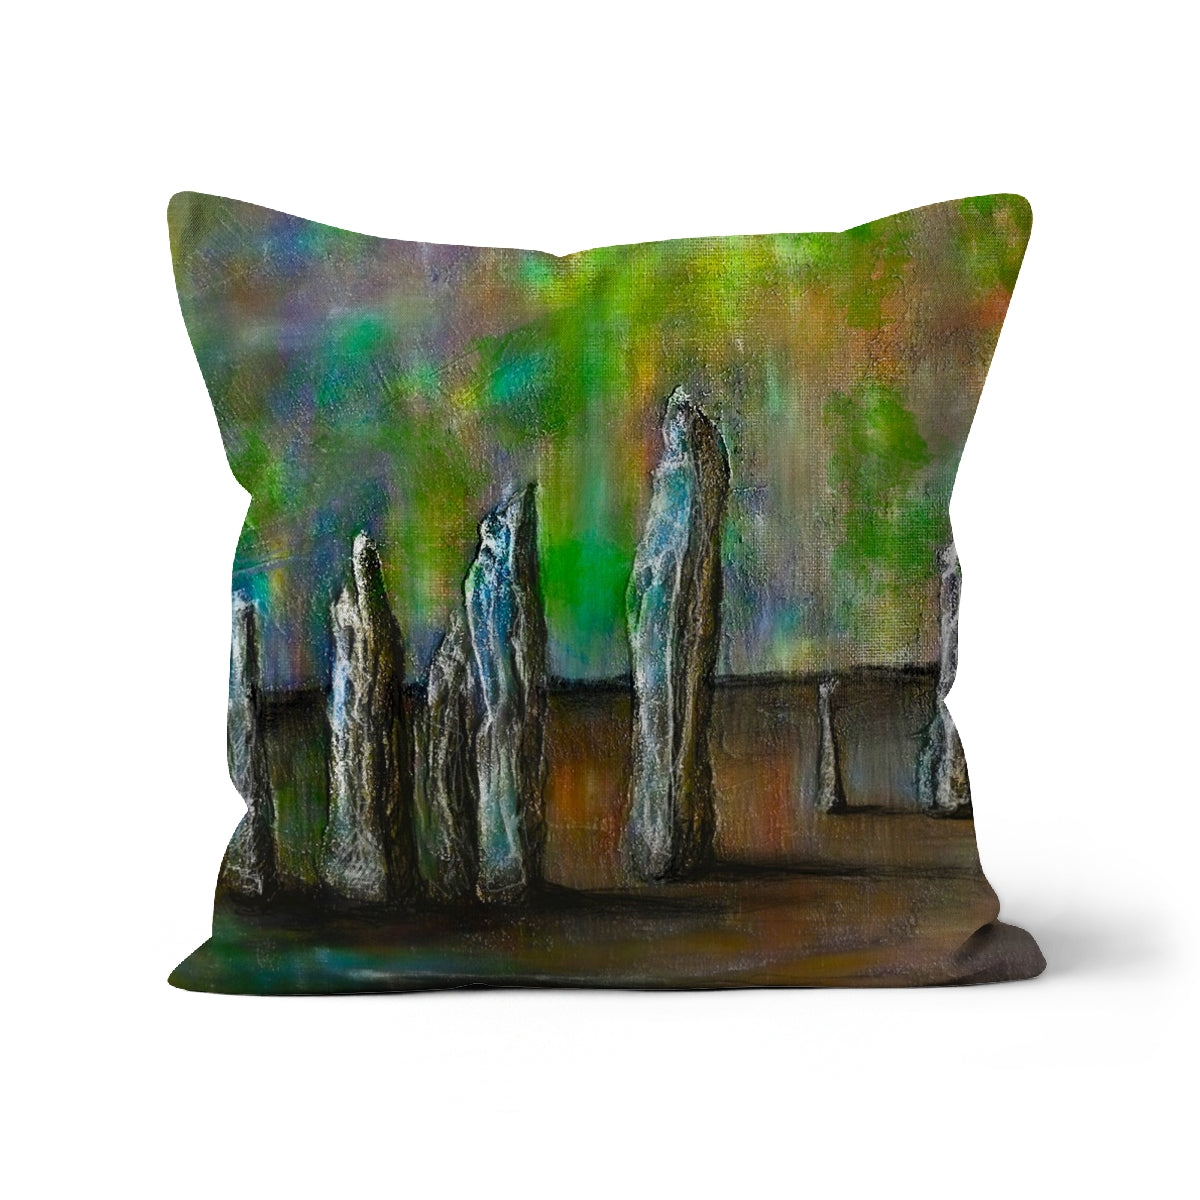 Callanish Northern Lights Art Gifts Cushion-Cushions-Hebridean Islands Art Gallery-Linen-16"x16"-Paintings, Prints, Homeware, Art Gifts From Scotland By Scottish Artist Kevin Hunter